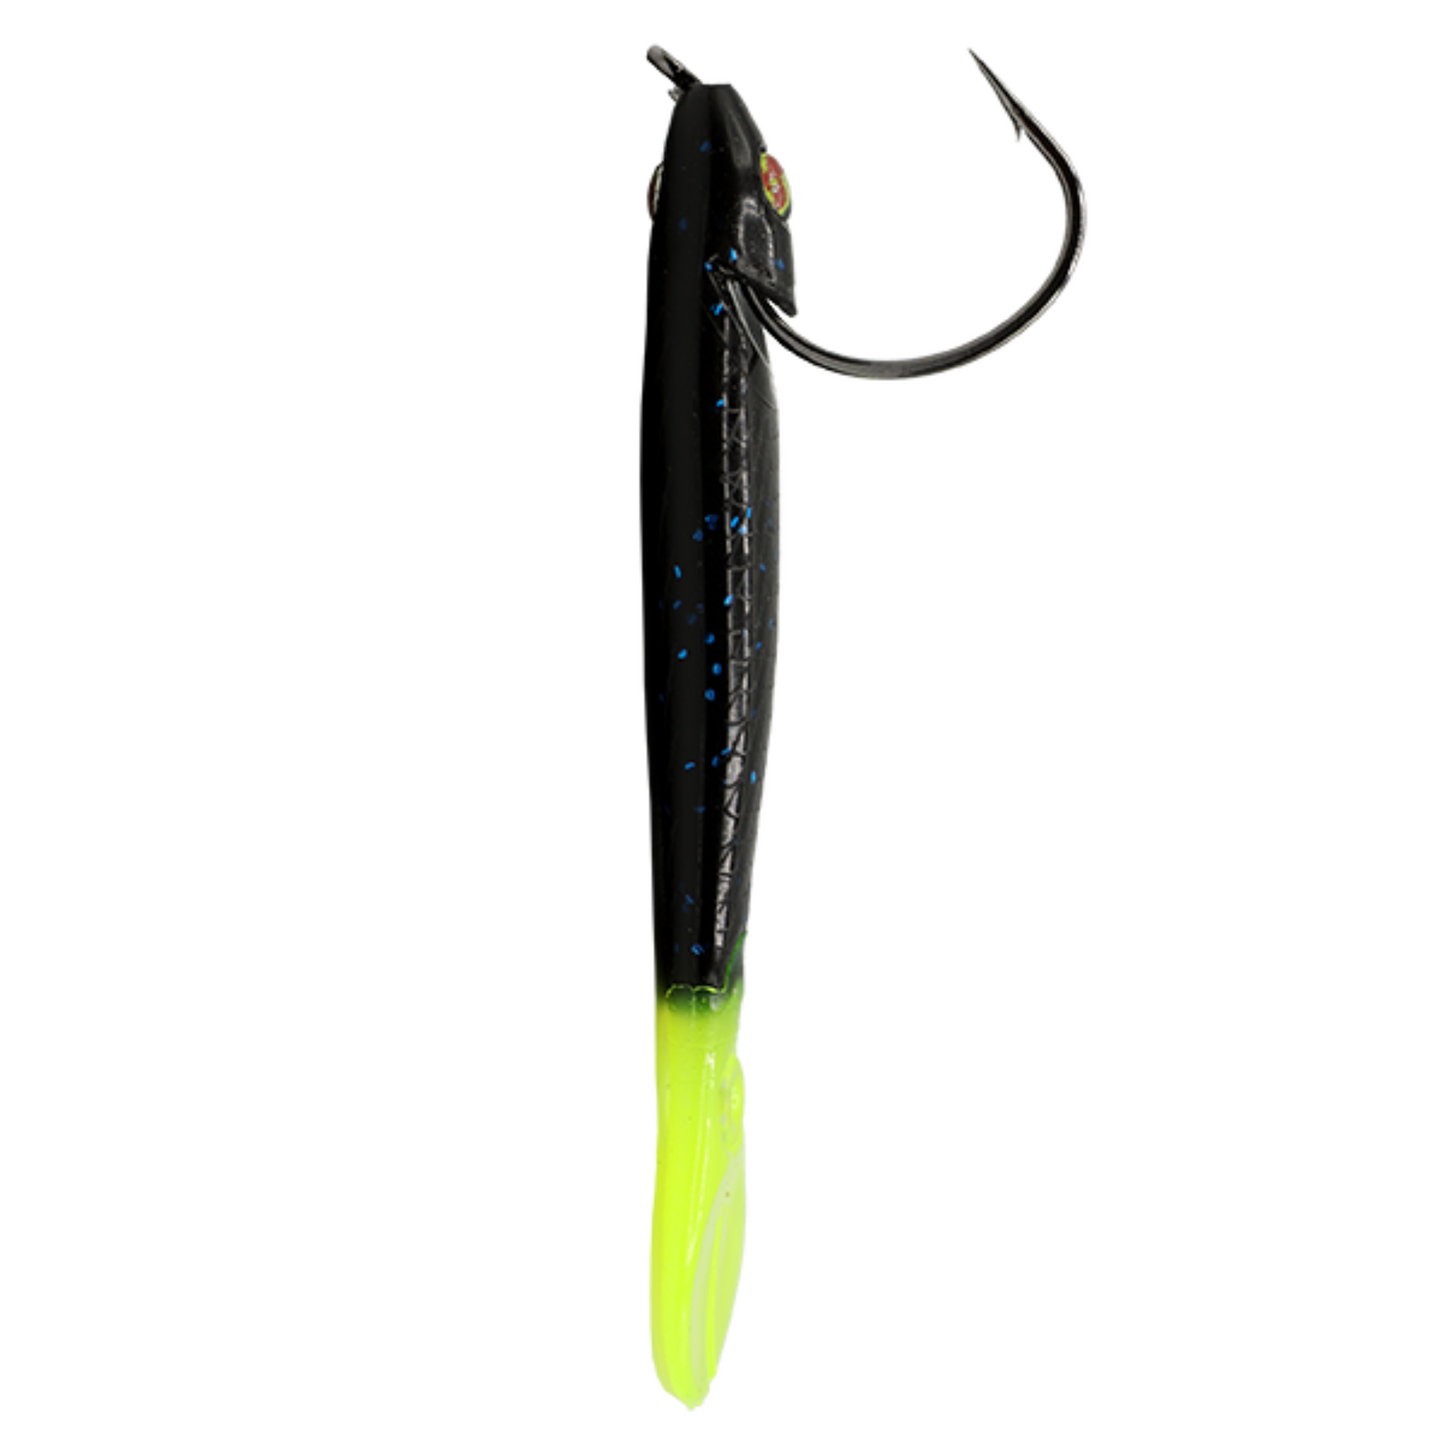 3.25" 5pc. Recoil Baits - Black w/ Blue Flake Chartreuse Tail